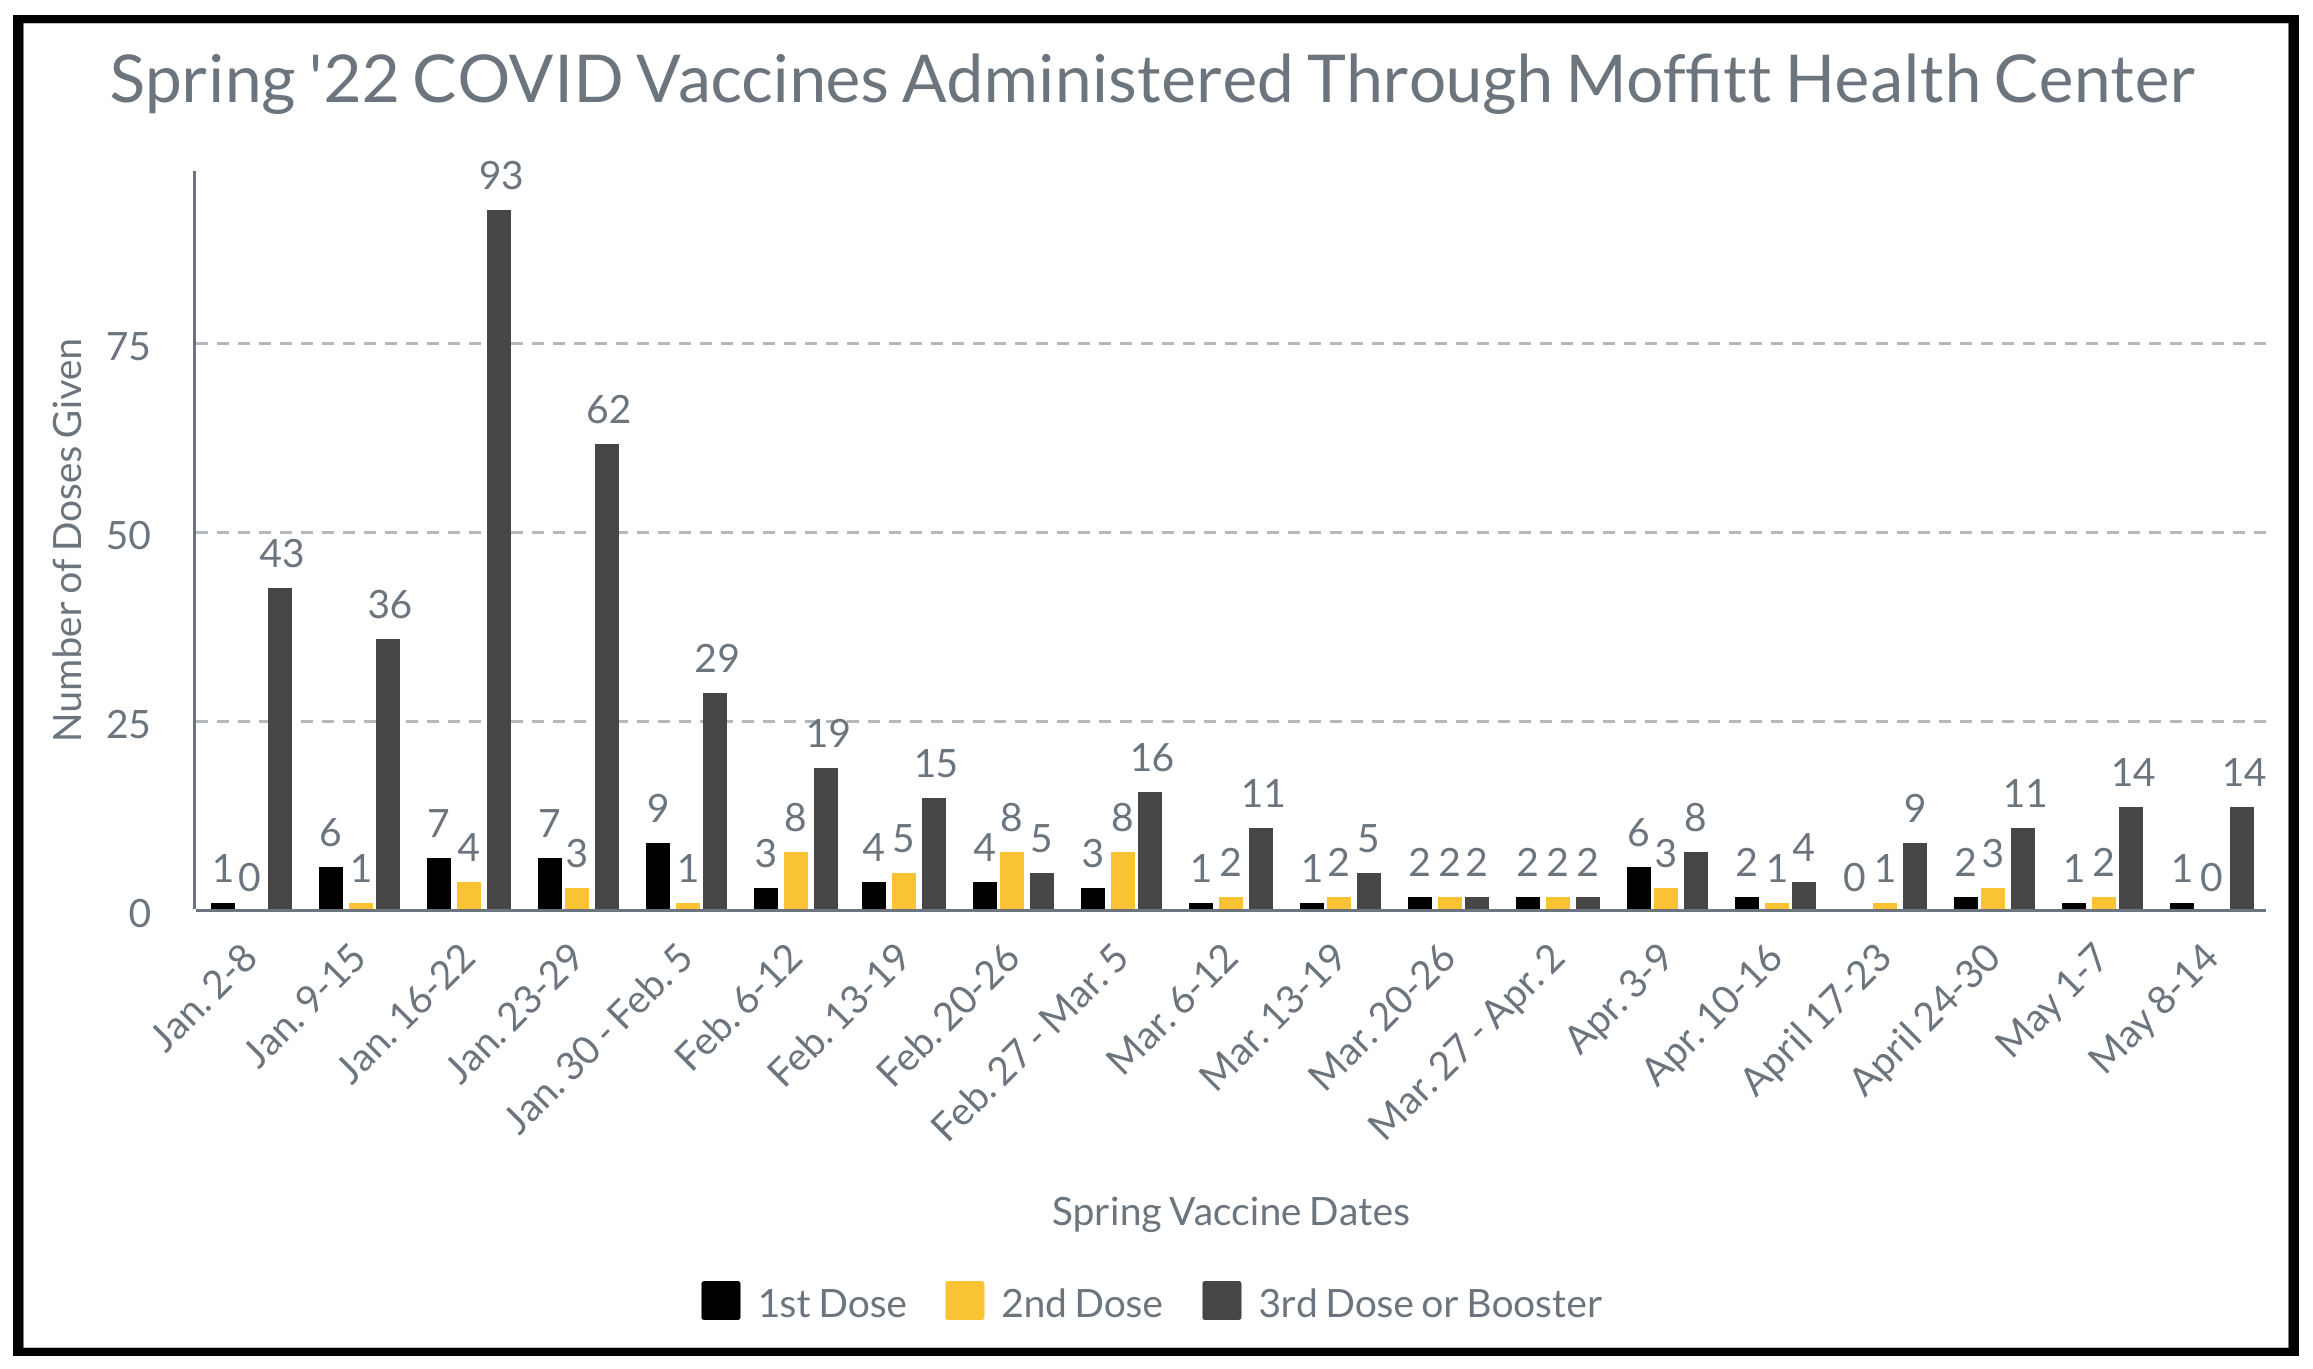 COVID Vaccinces Administered at MHC in Spring of 2022